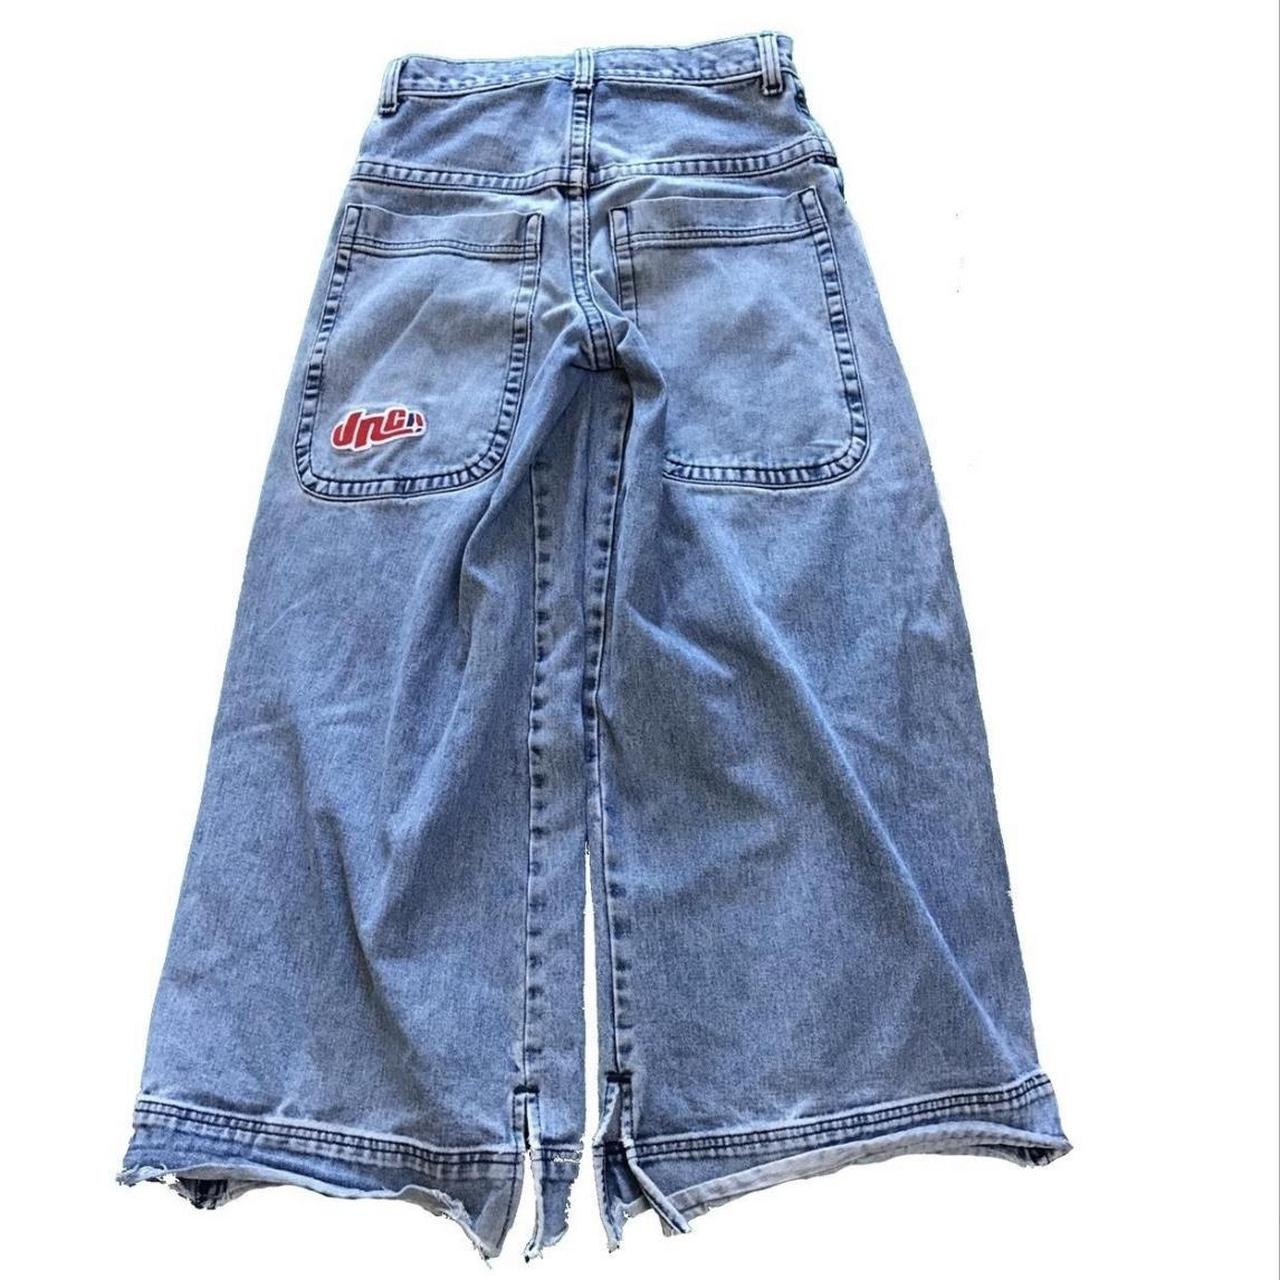 jnco destroyer jeans 32 inch leg openings small red... - Depop